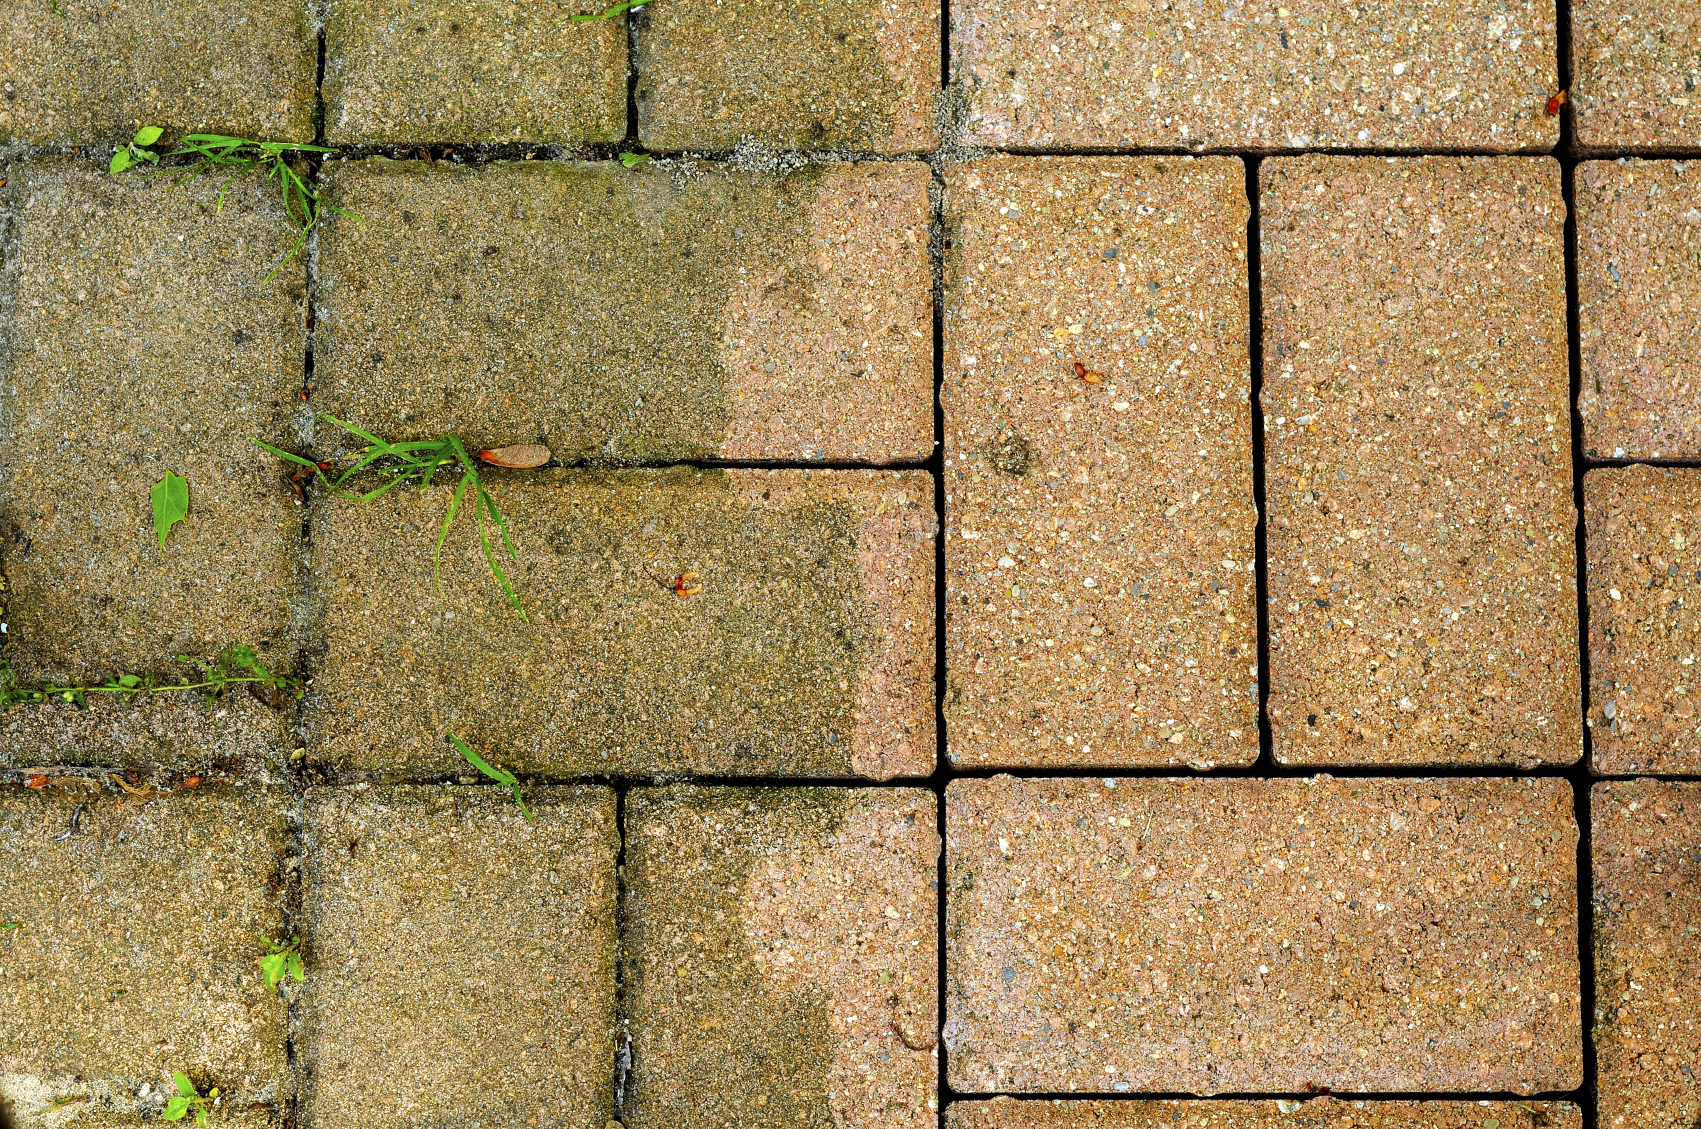 How To Clean Your Brick Patio Step By, How To Clean Patio Bricks With Bleach